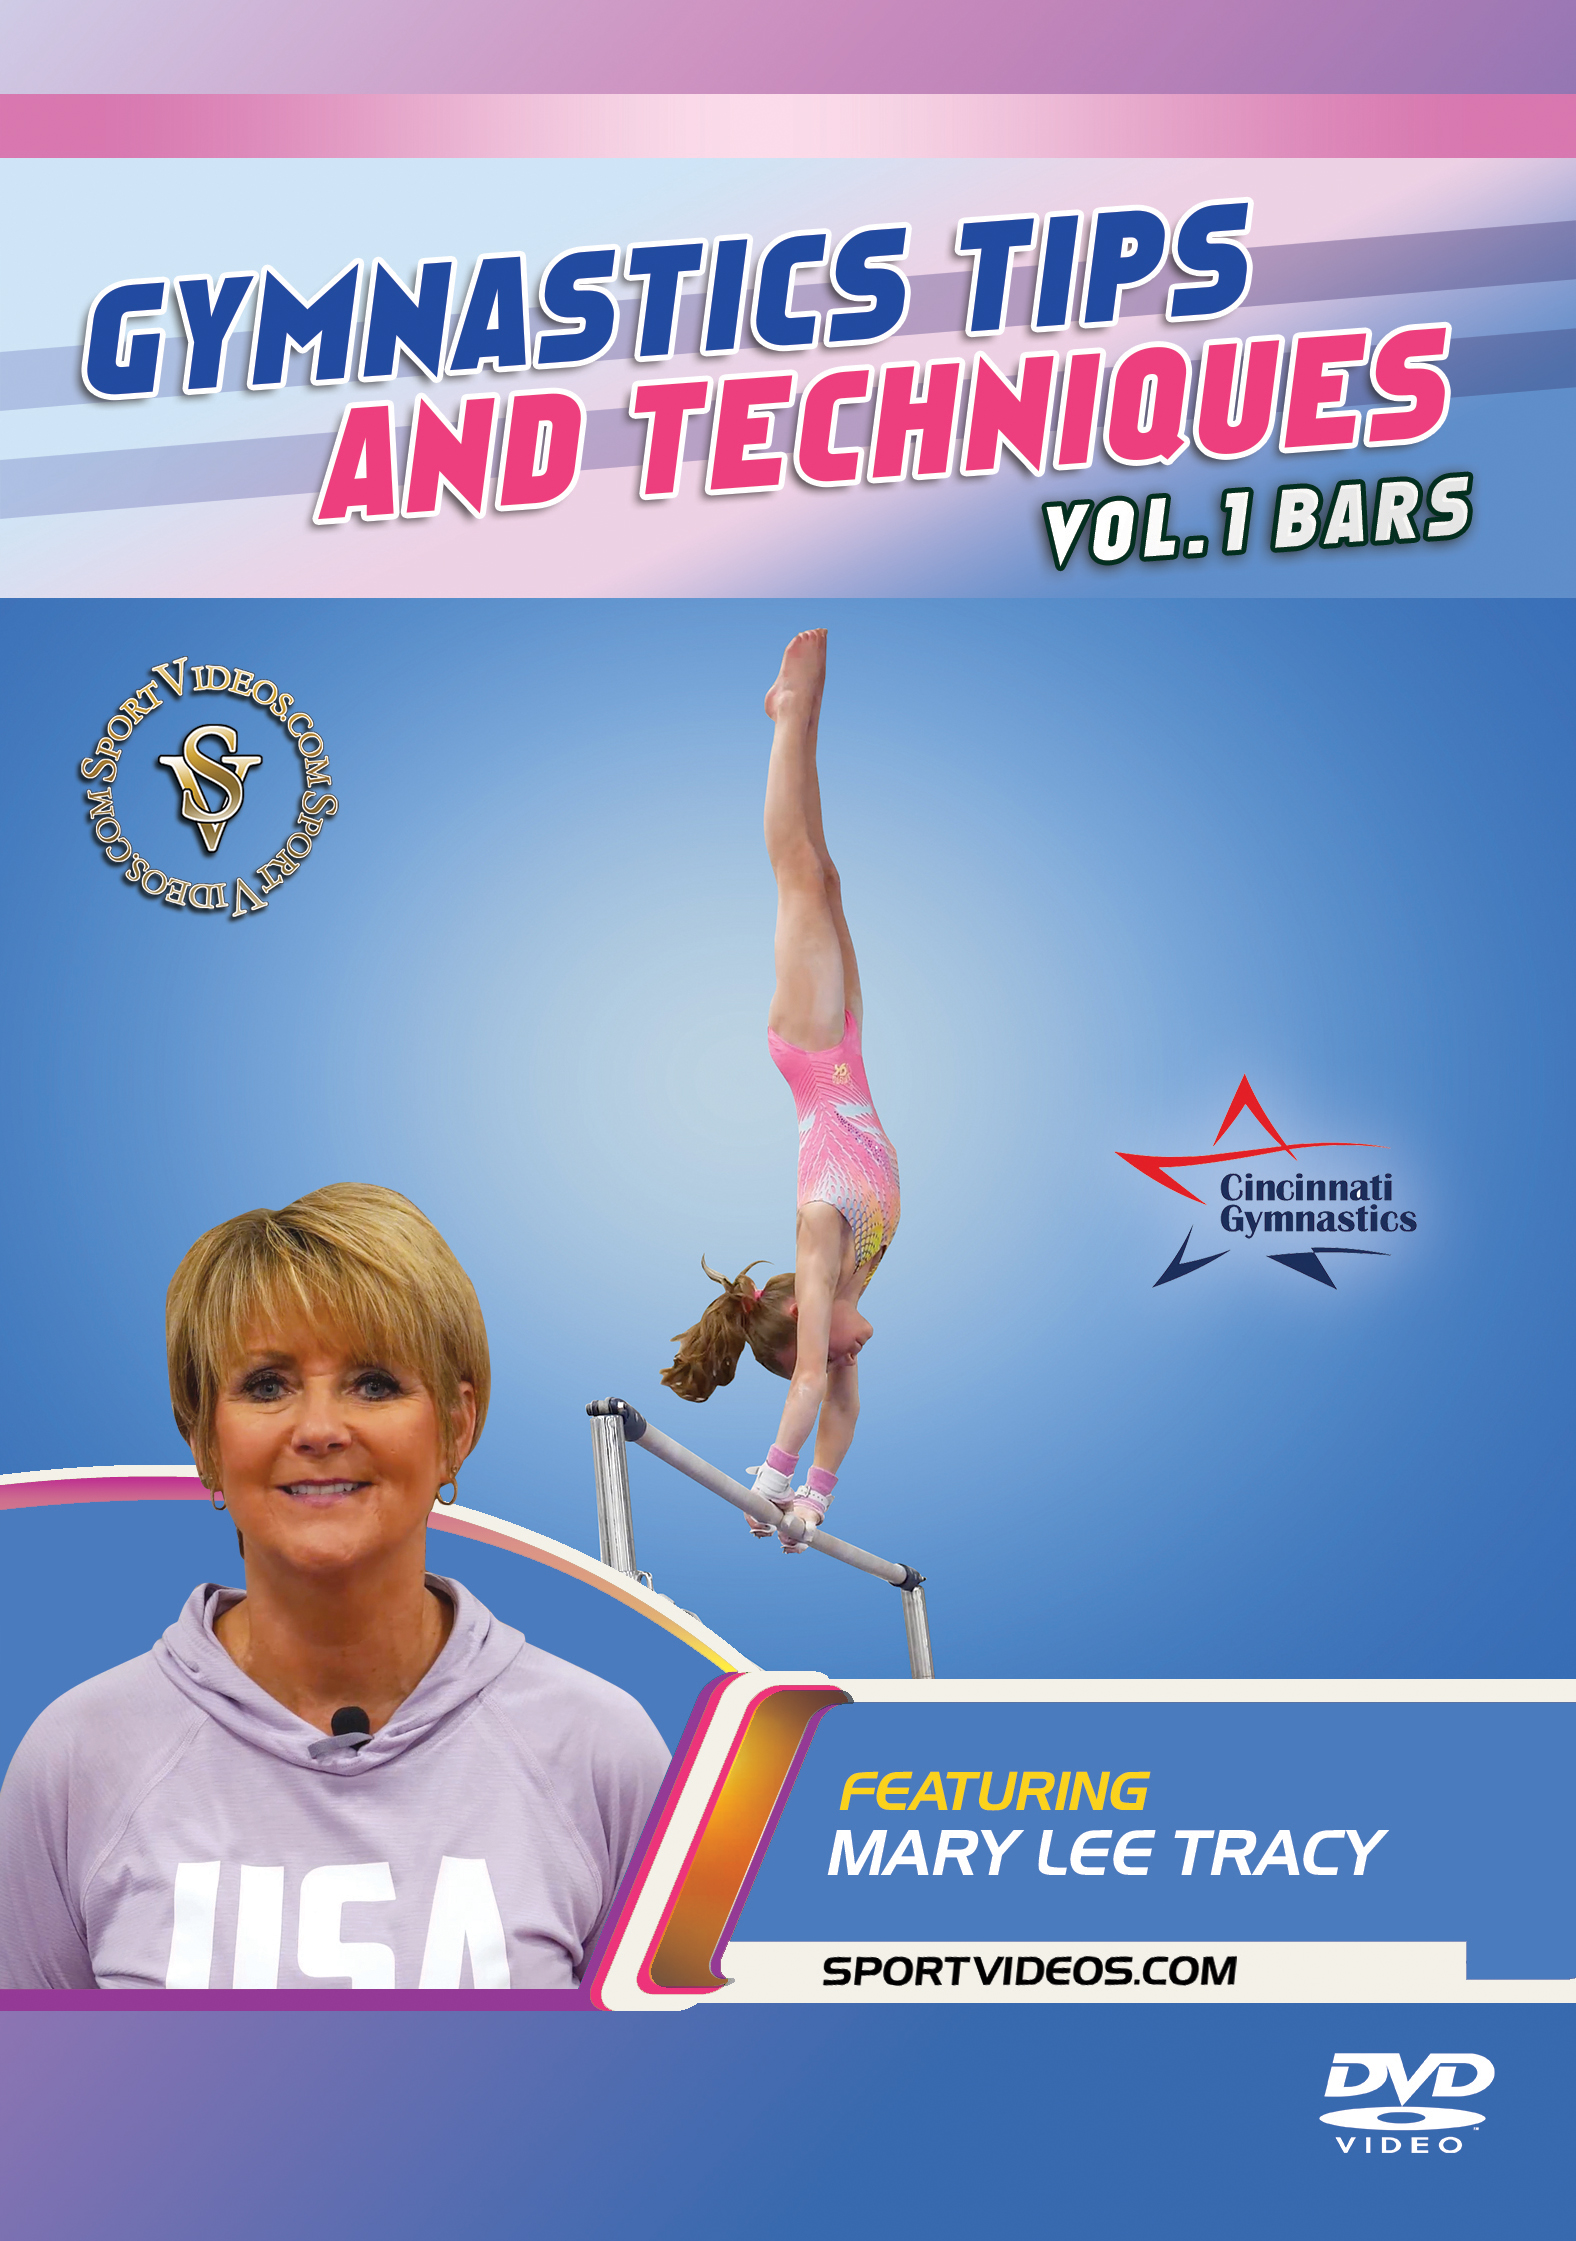 Gymnastics Tips and Techniques - Vol. 1 Bars  Download featuring Coach Mary Lee Tracy 